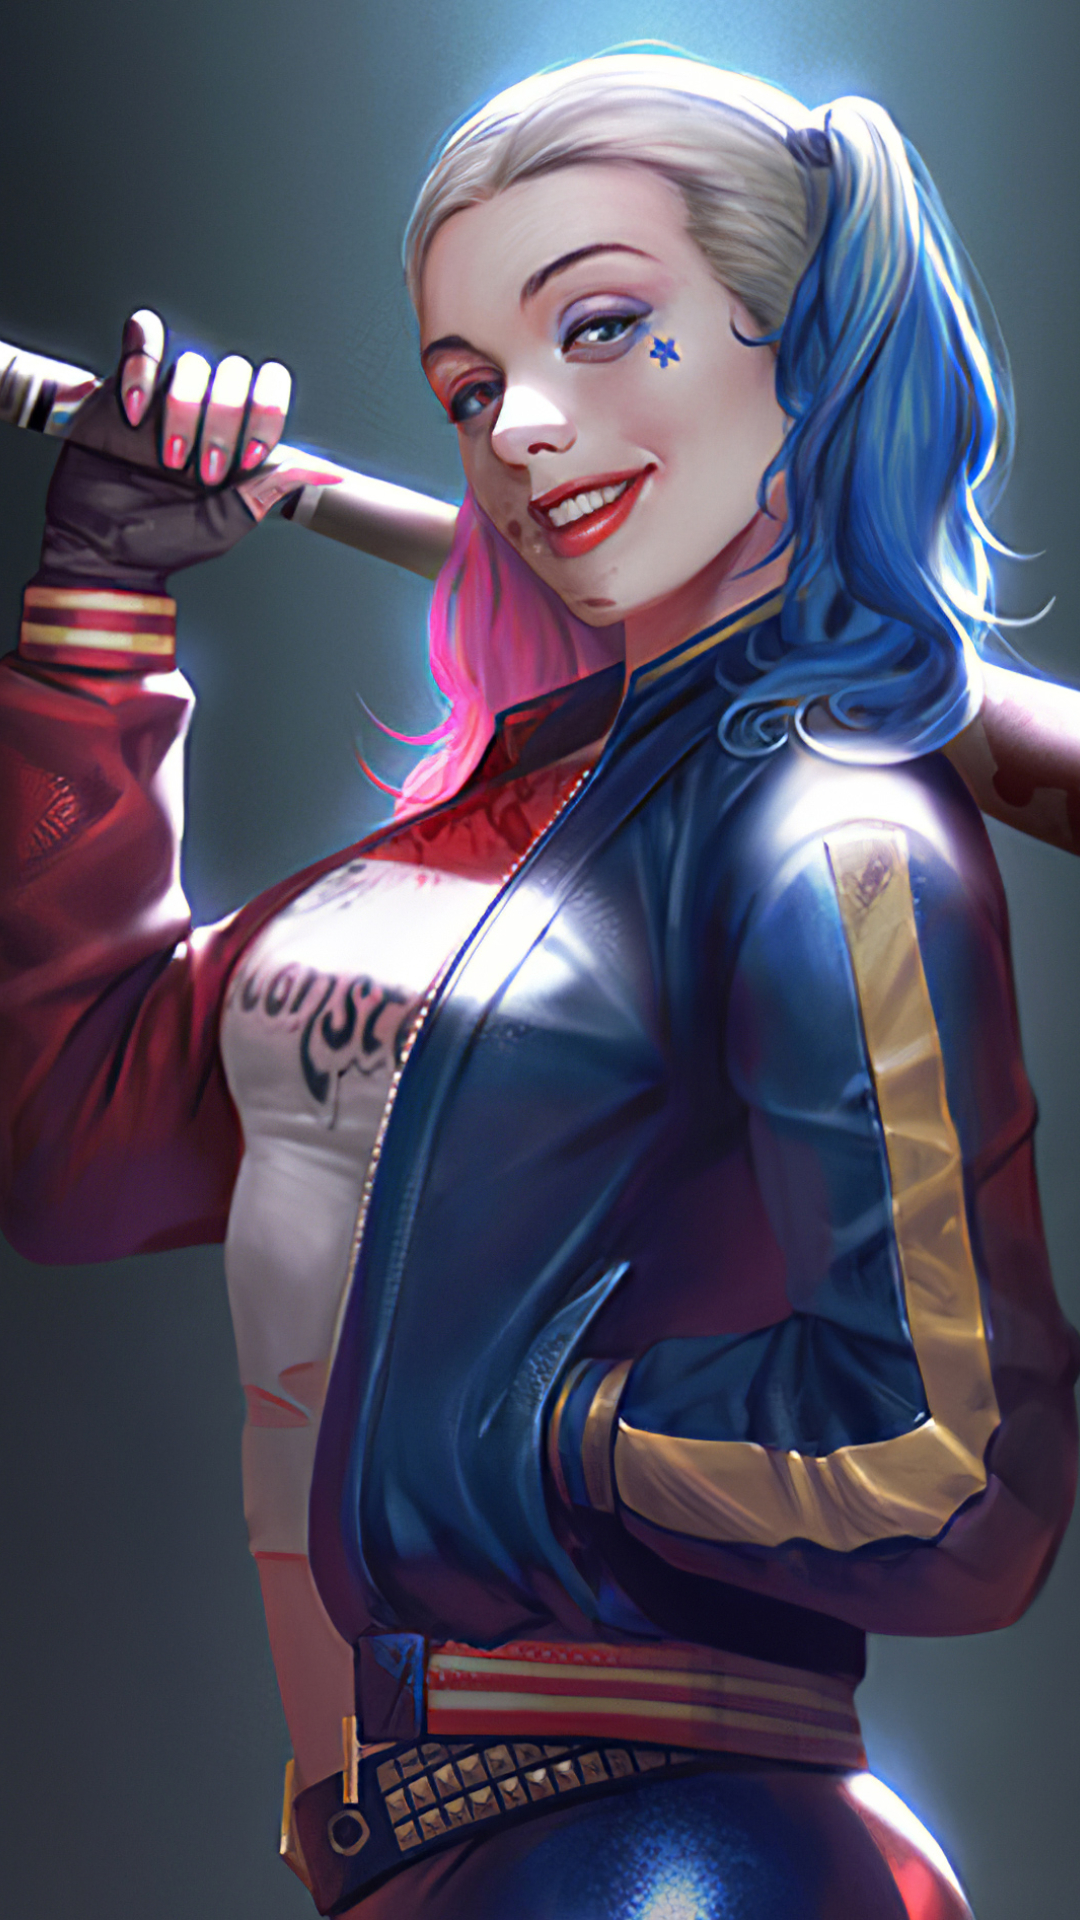 1080x1920 Harley Quinn Cute Smile Iphone 7, 6s, 6 Plus and Pixel XL